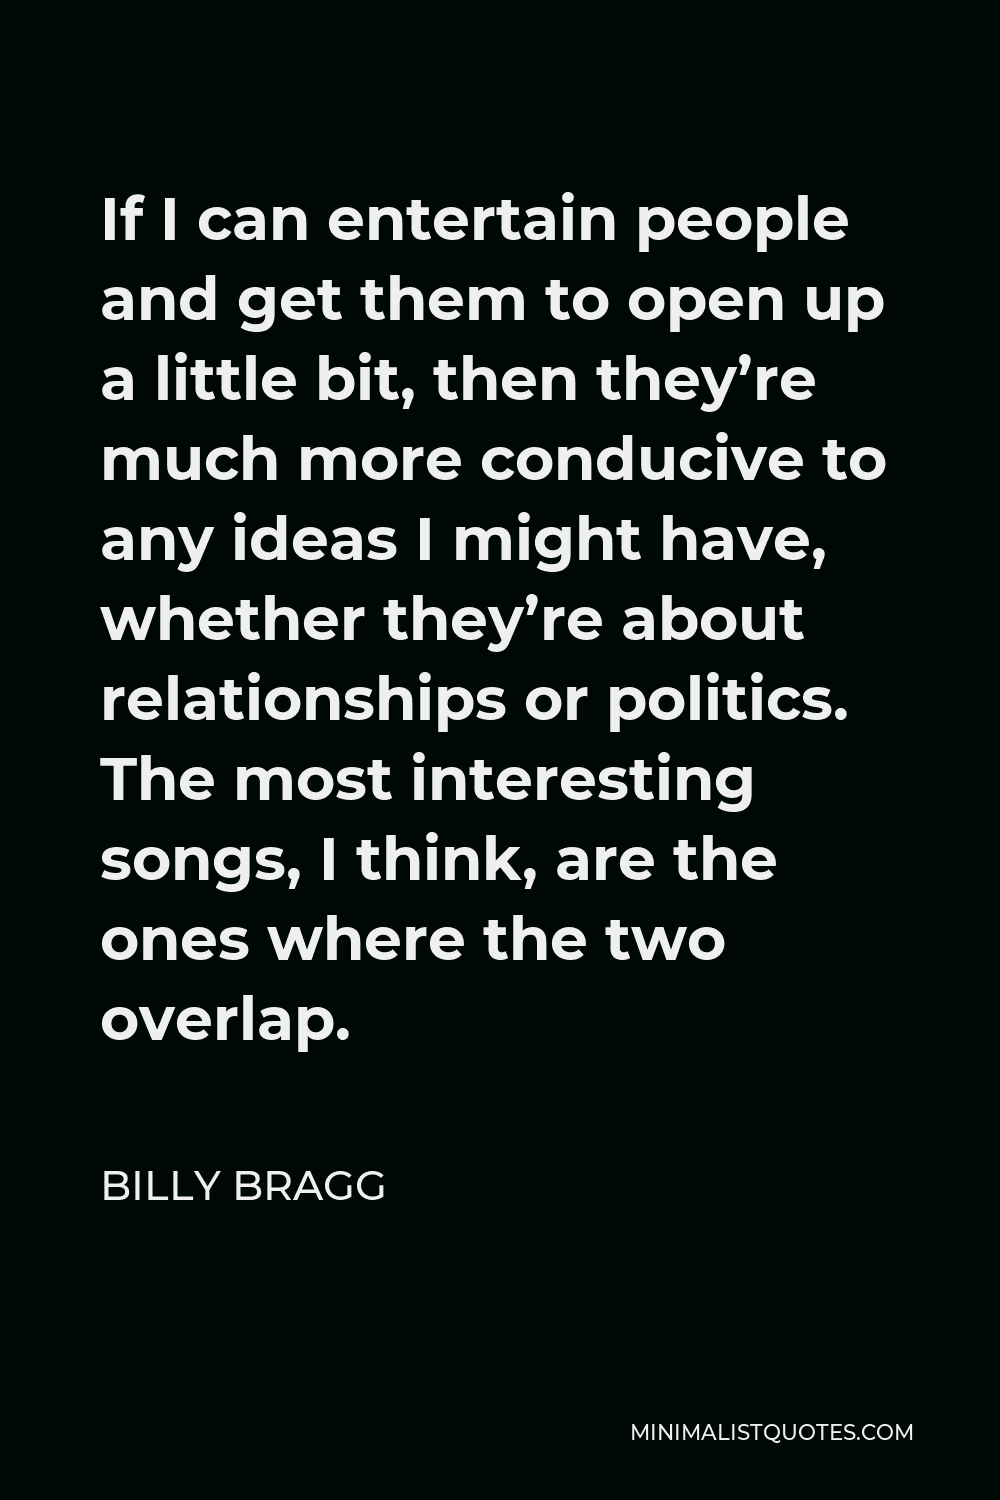 Billy Bragg Quote - If I can entertain people and get them to open up a little bit, then they’re much more conducive to any ideas I might have, whether they’re about relationships or politics. The most interesting songs, I think, are the ones where the two overlap.